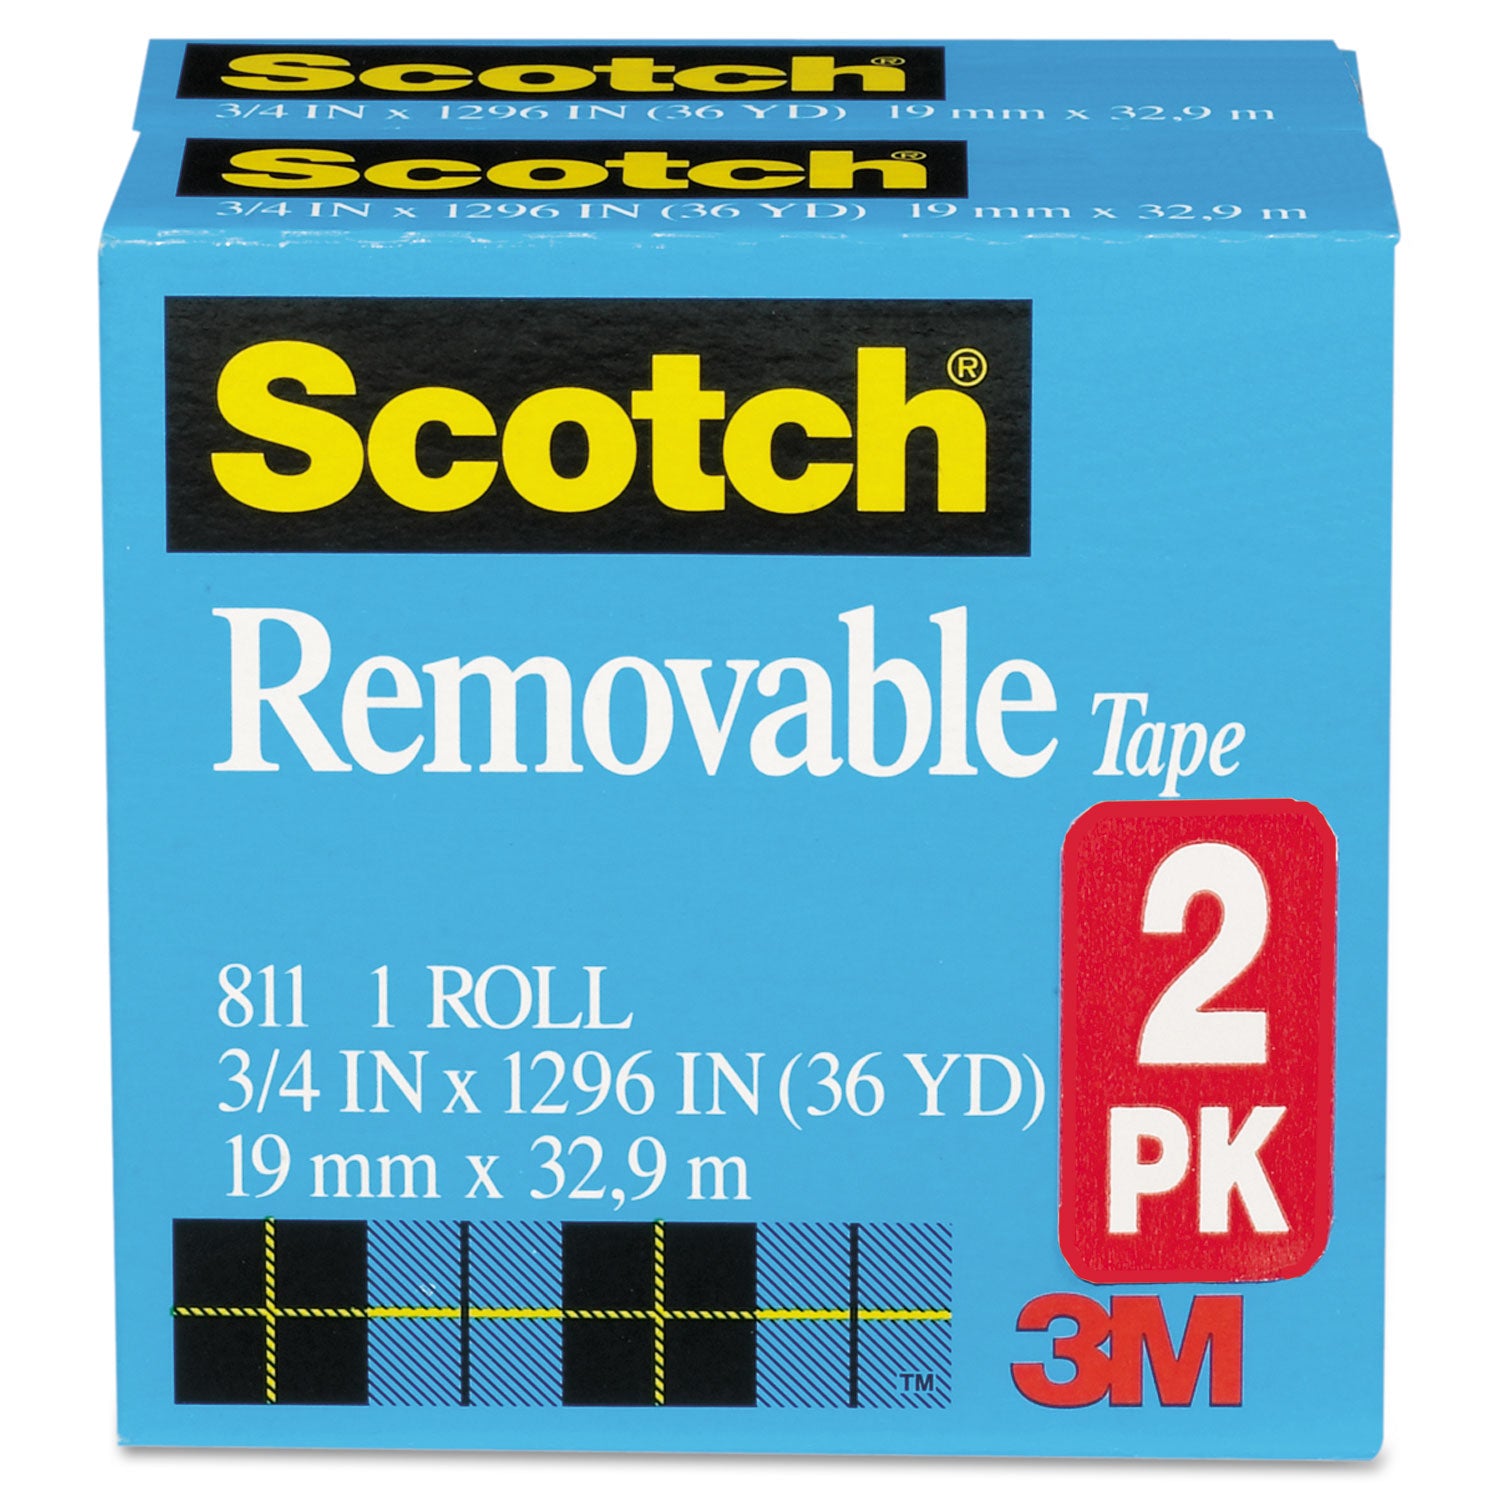 Removable Tape, 1" Core, 0.75" x 36 yds, Transparent, 2/Pack - 